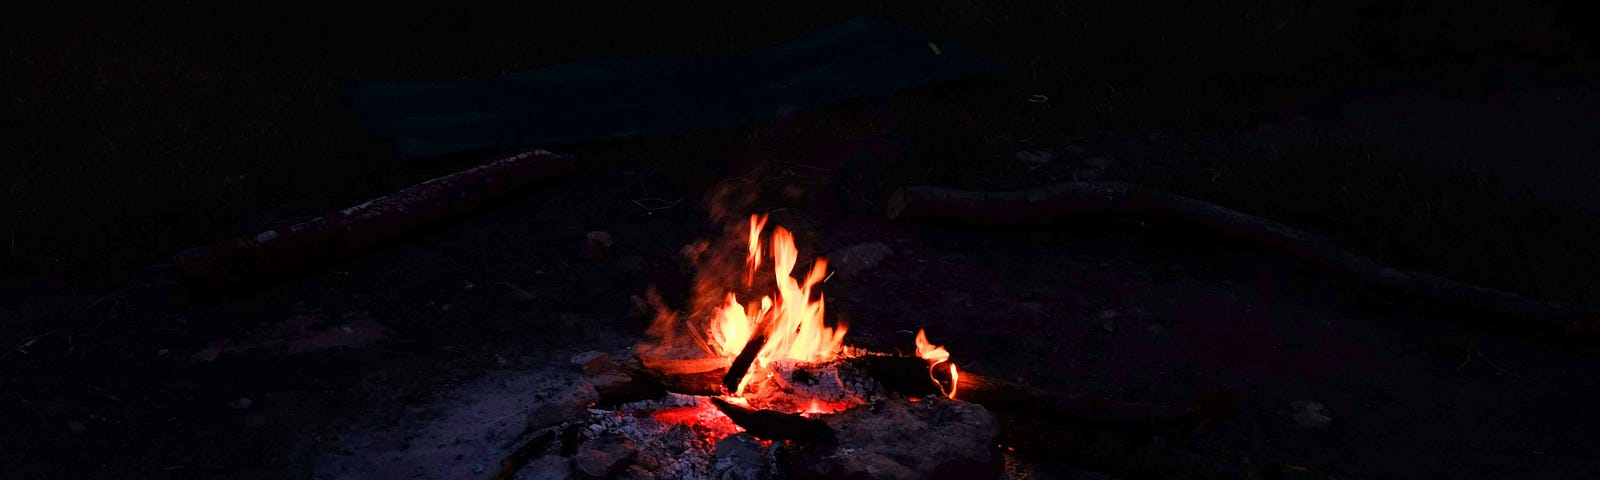 campfire in a dark wooded setting, close up